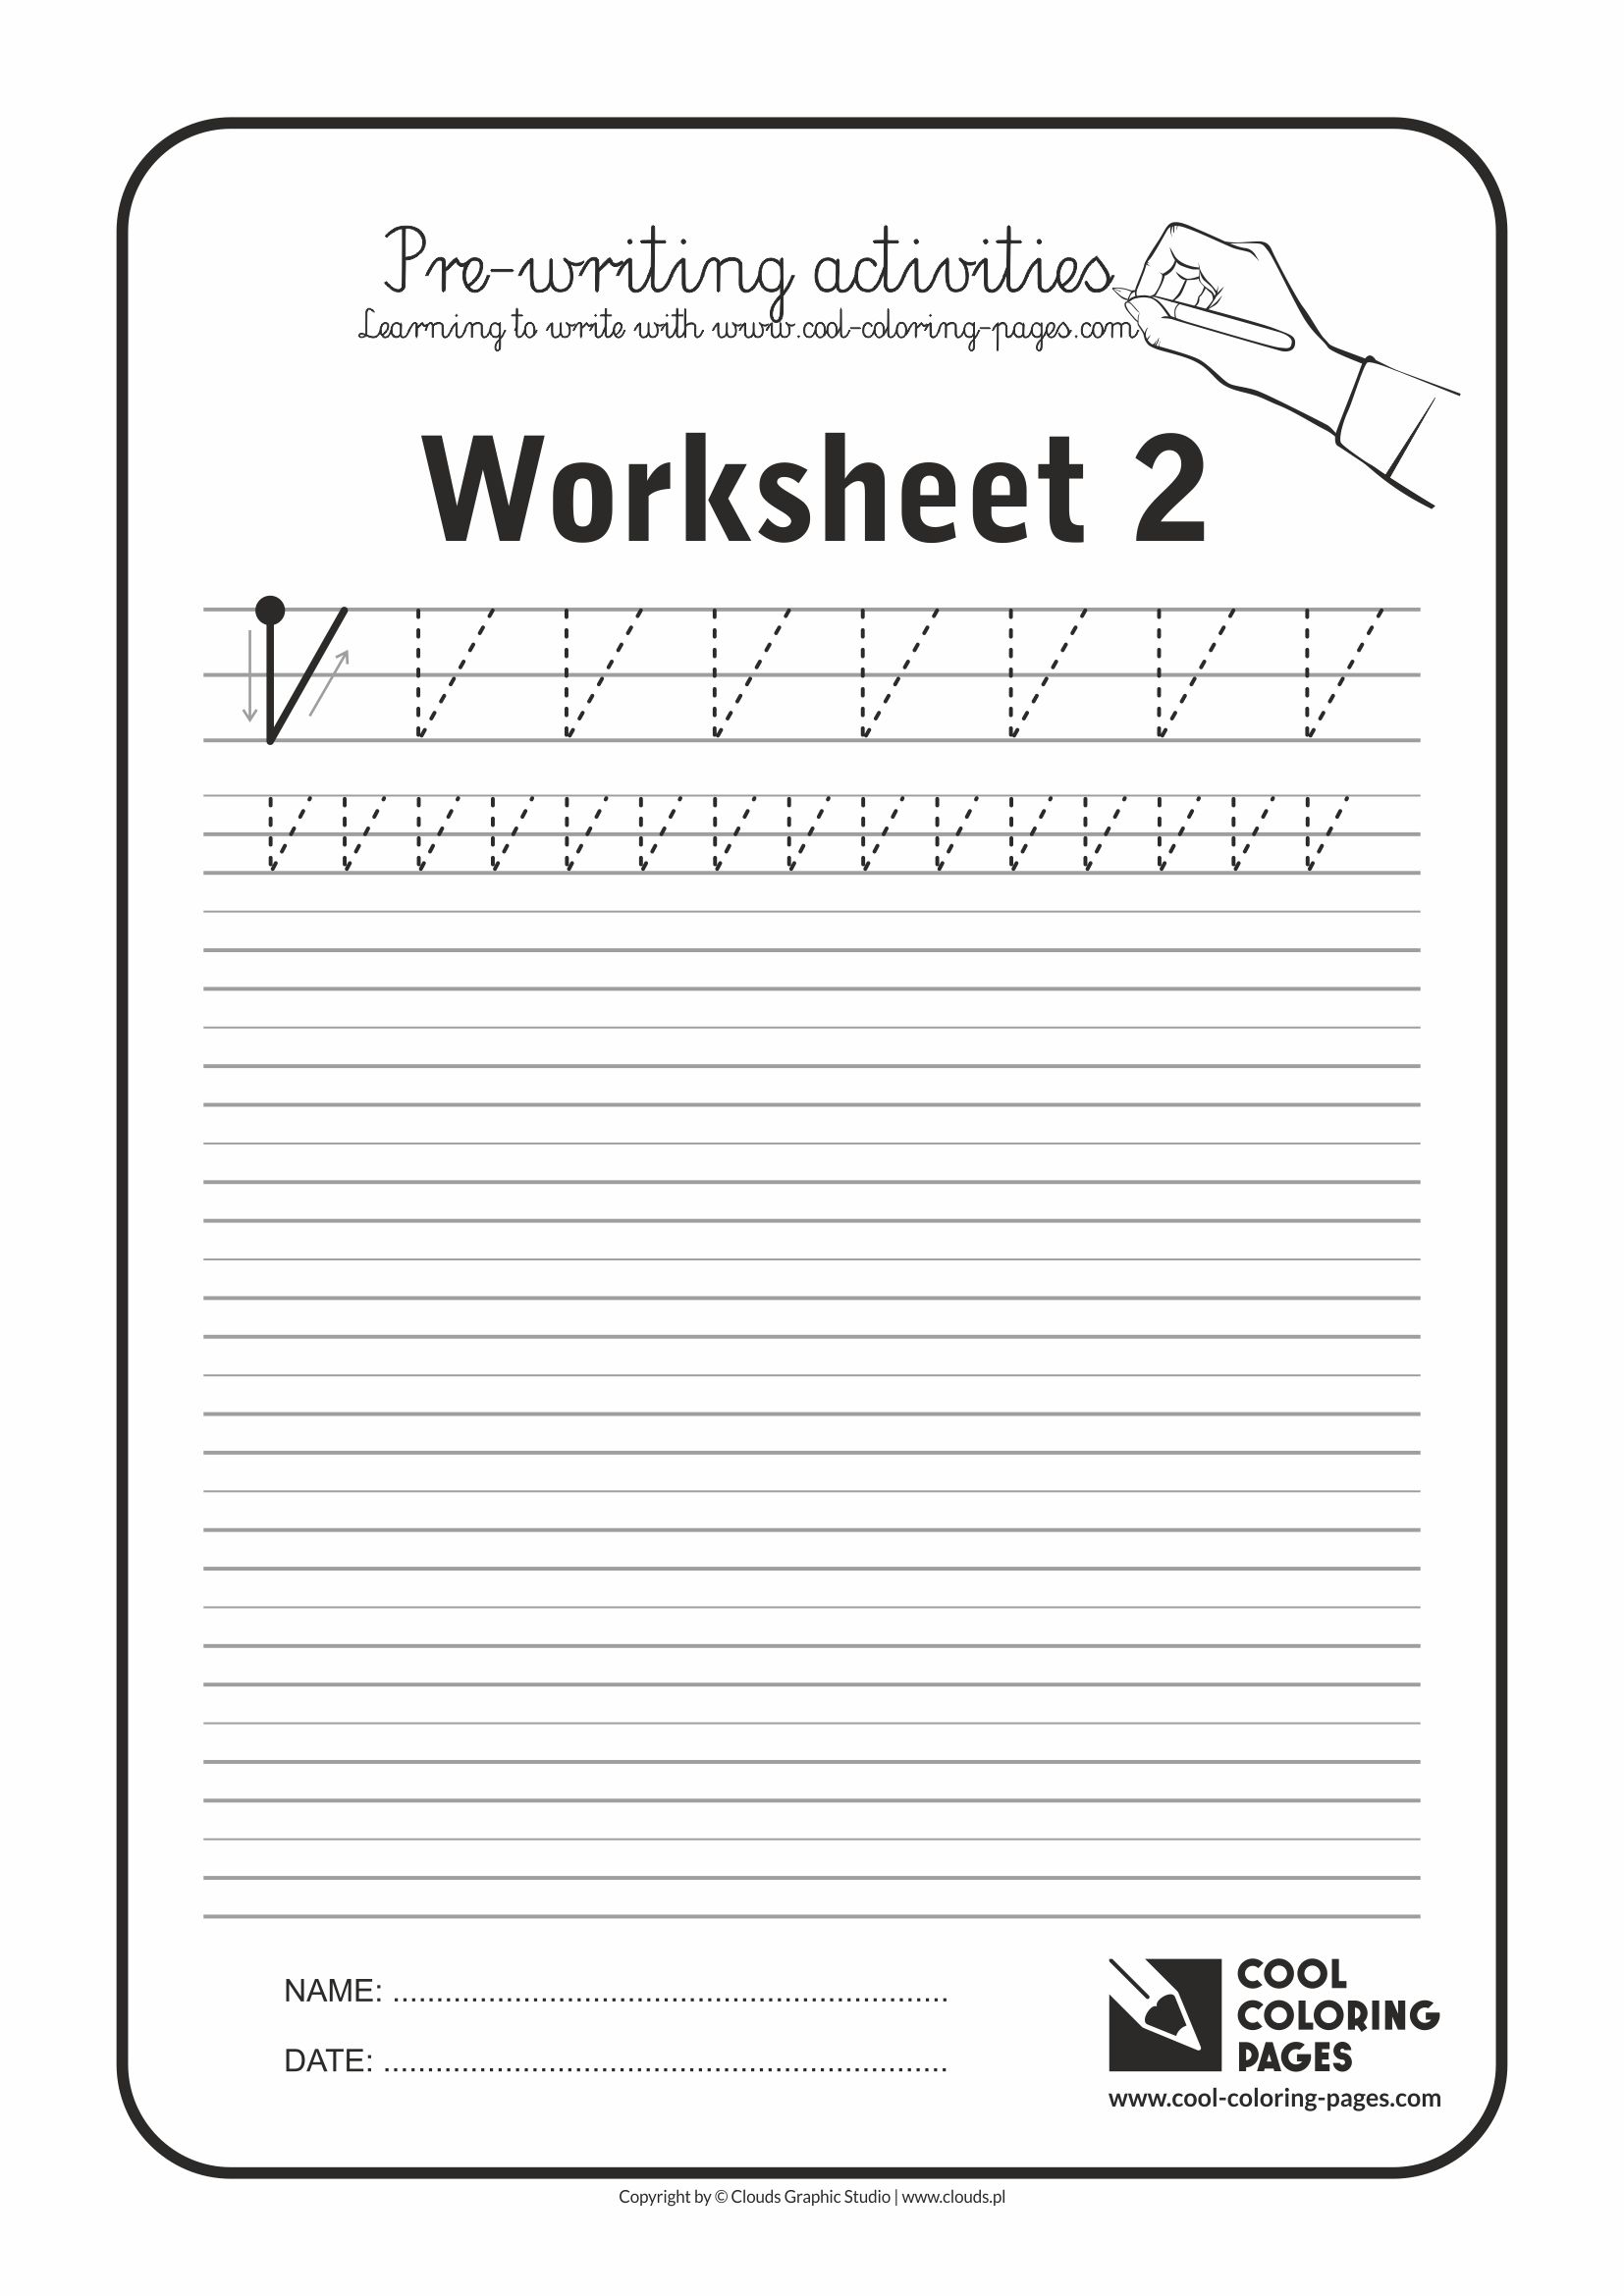 Cool Coloring Pages / Pre-writing activities / Worksheet no.2